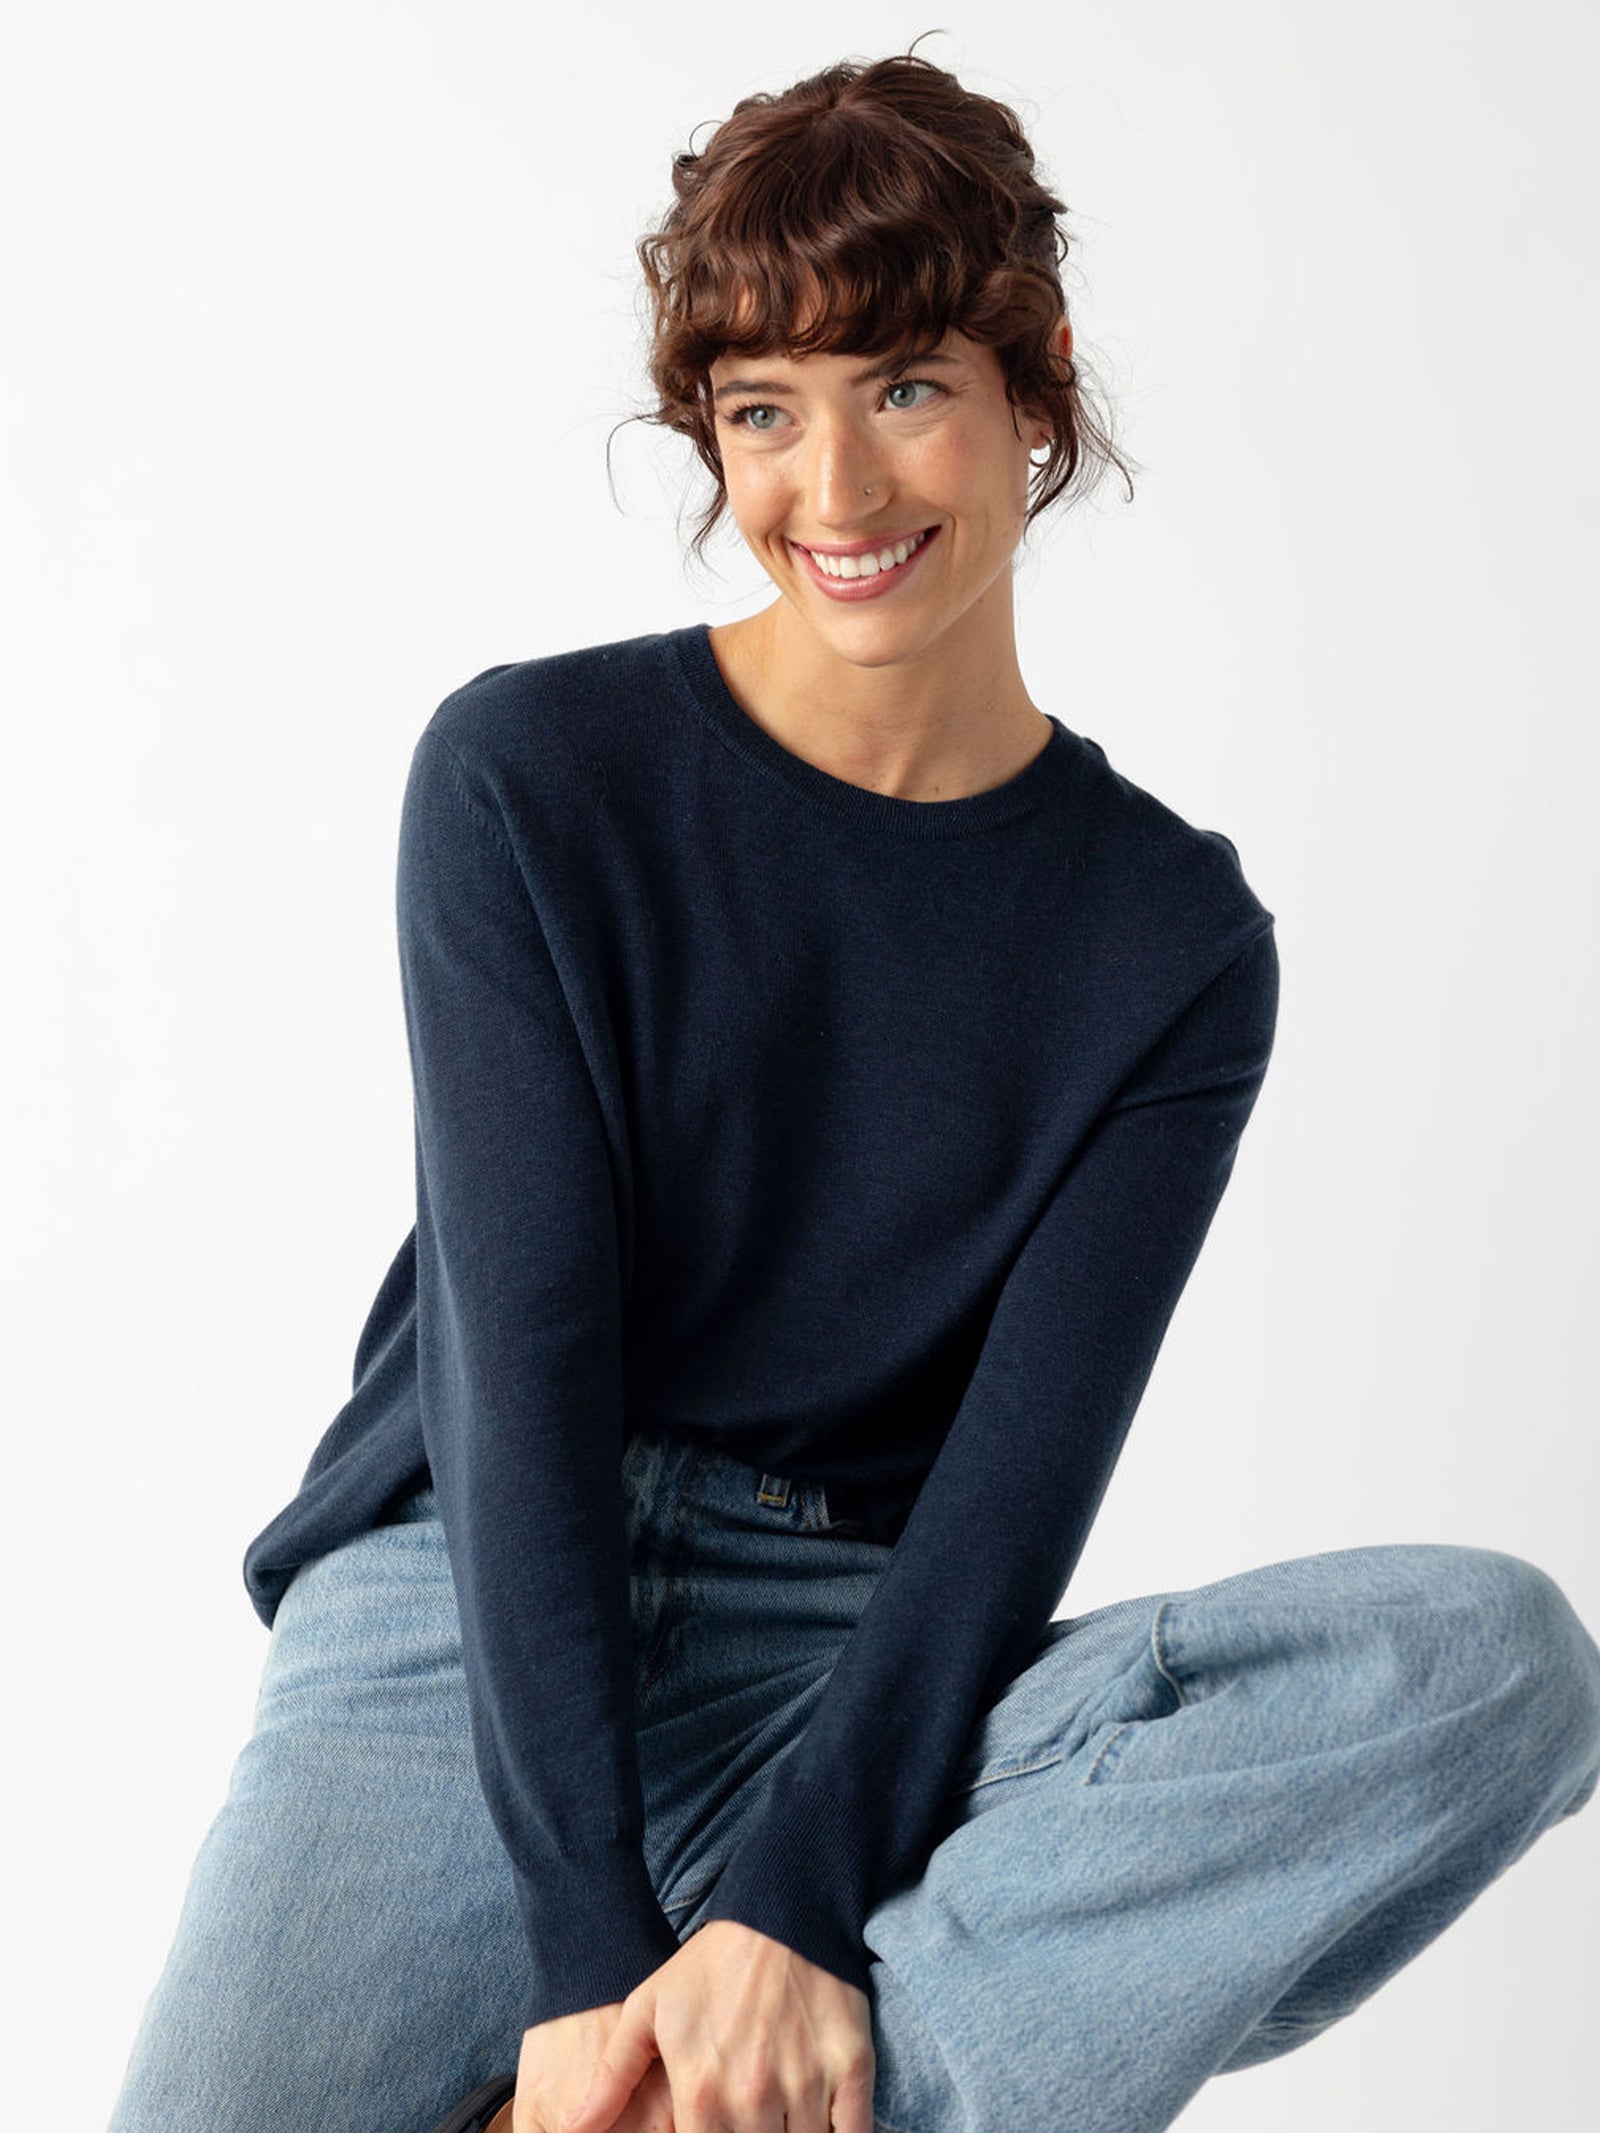 Woman smiling wearing jeans and an eclipse airknit sweater with white background 